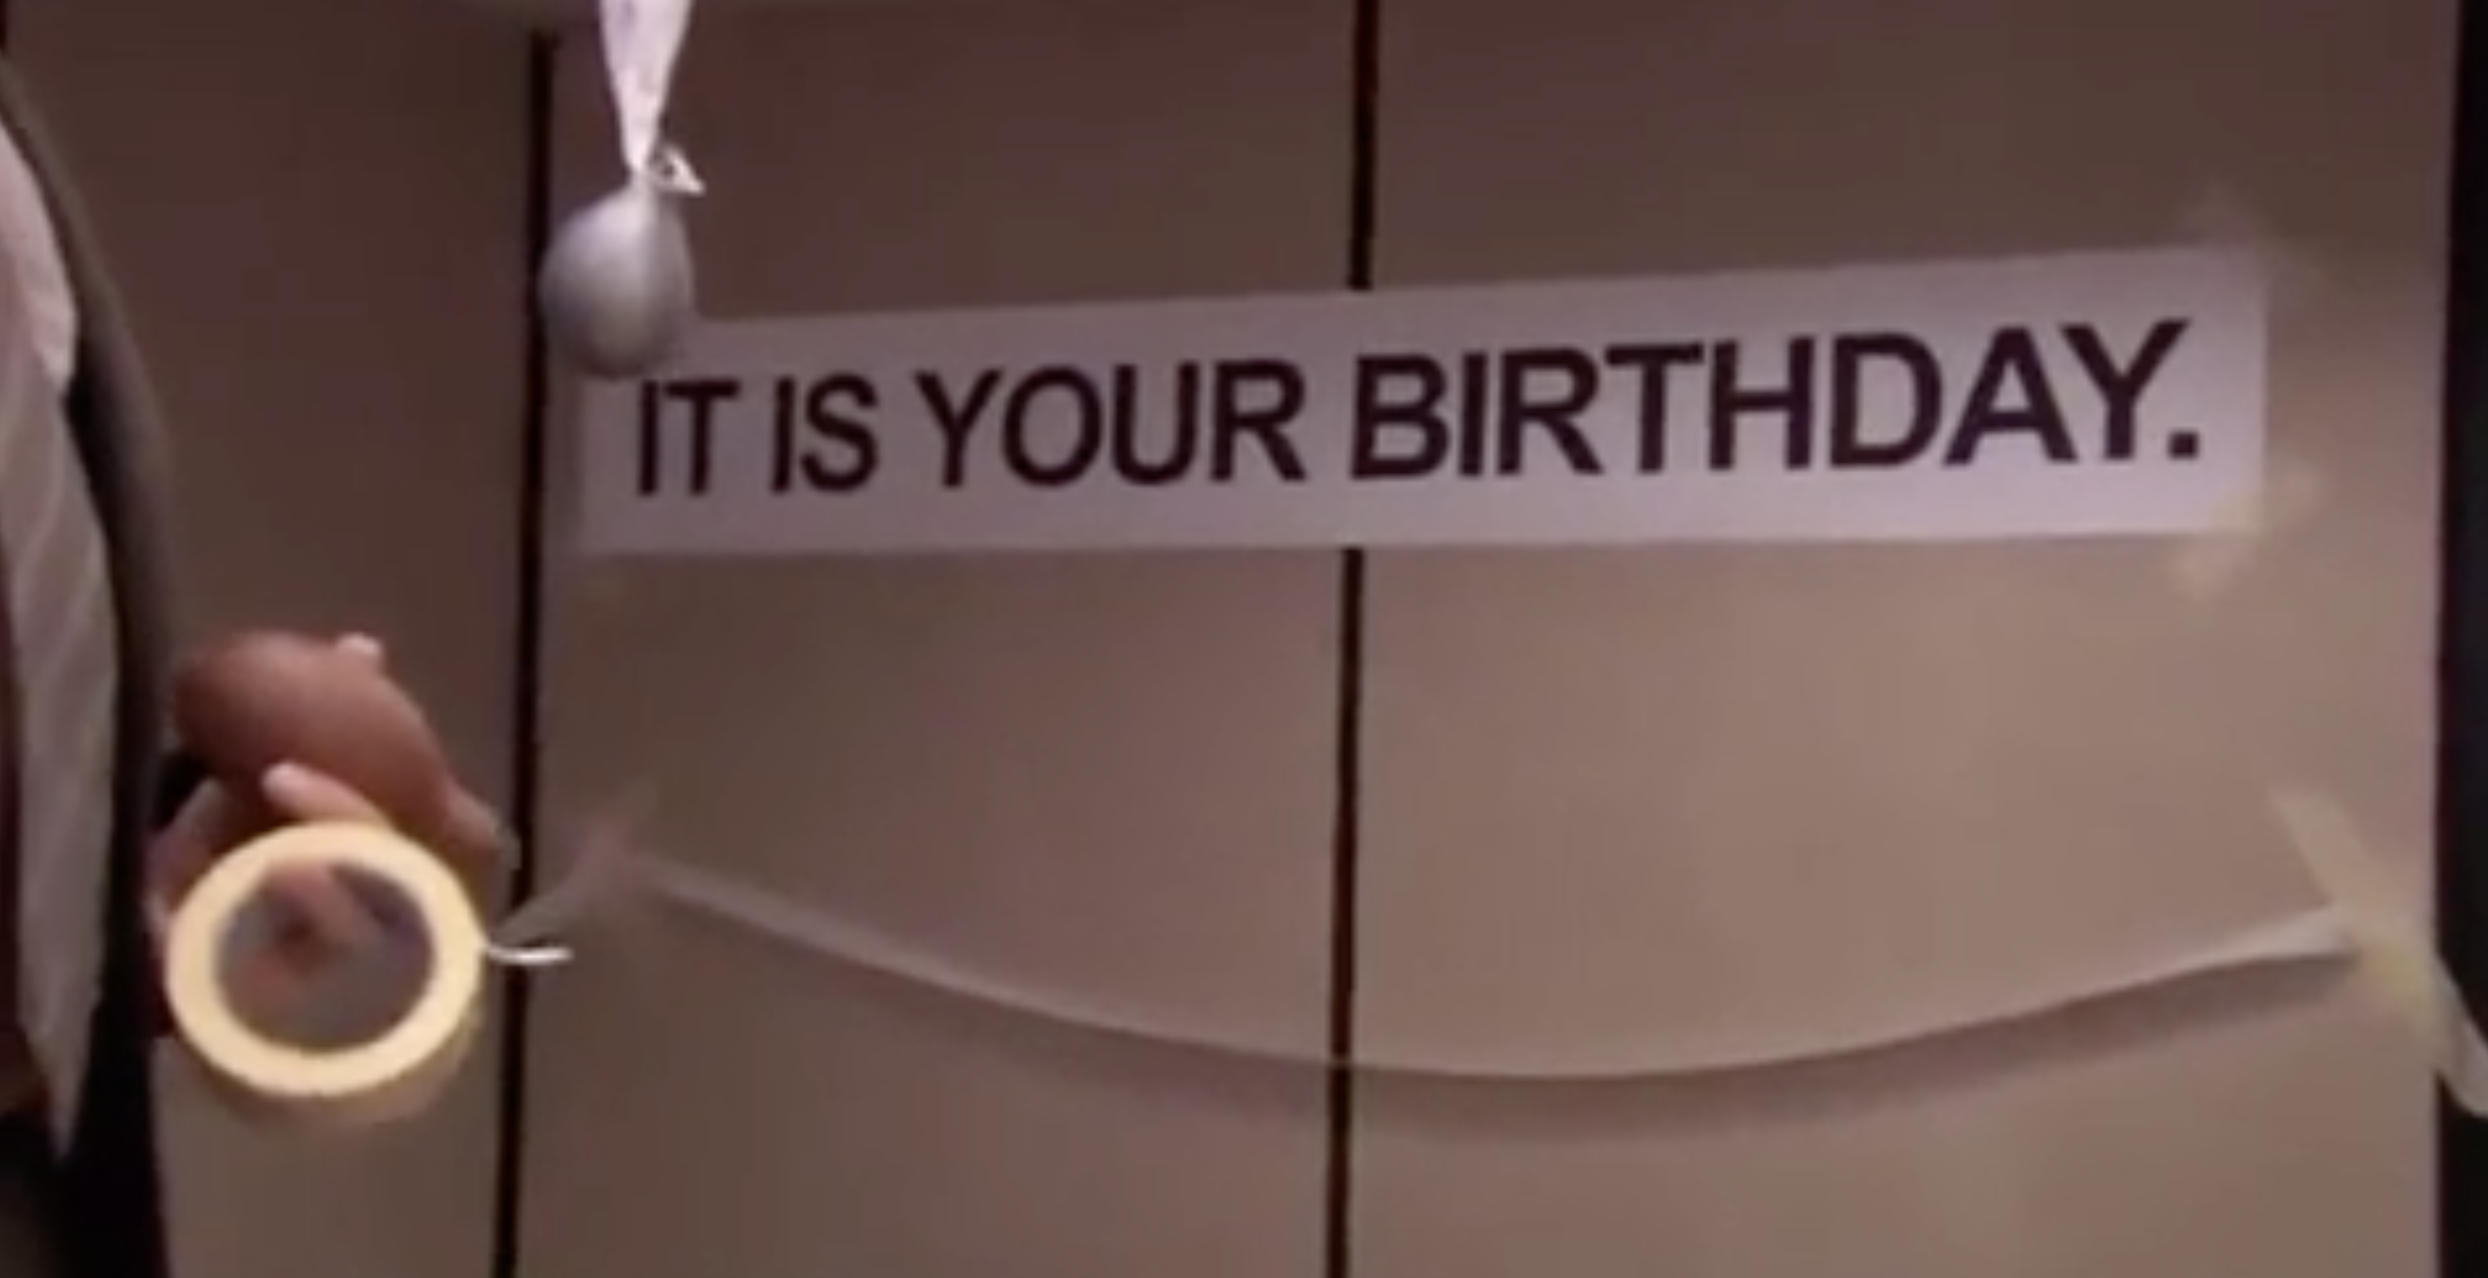 A scene from &quot;The Office&quot; where they tape a sign on the wall that says &quot;It is your birthday&quot;